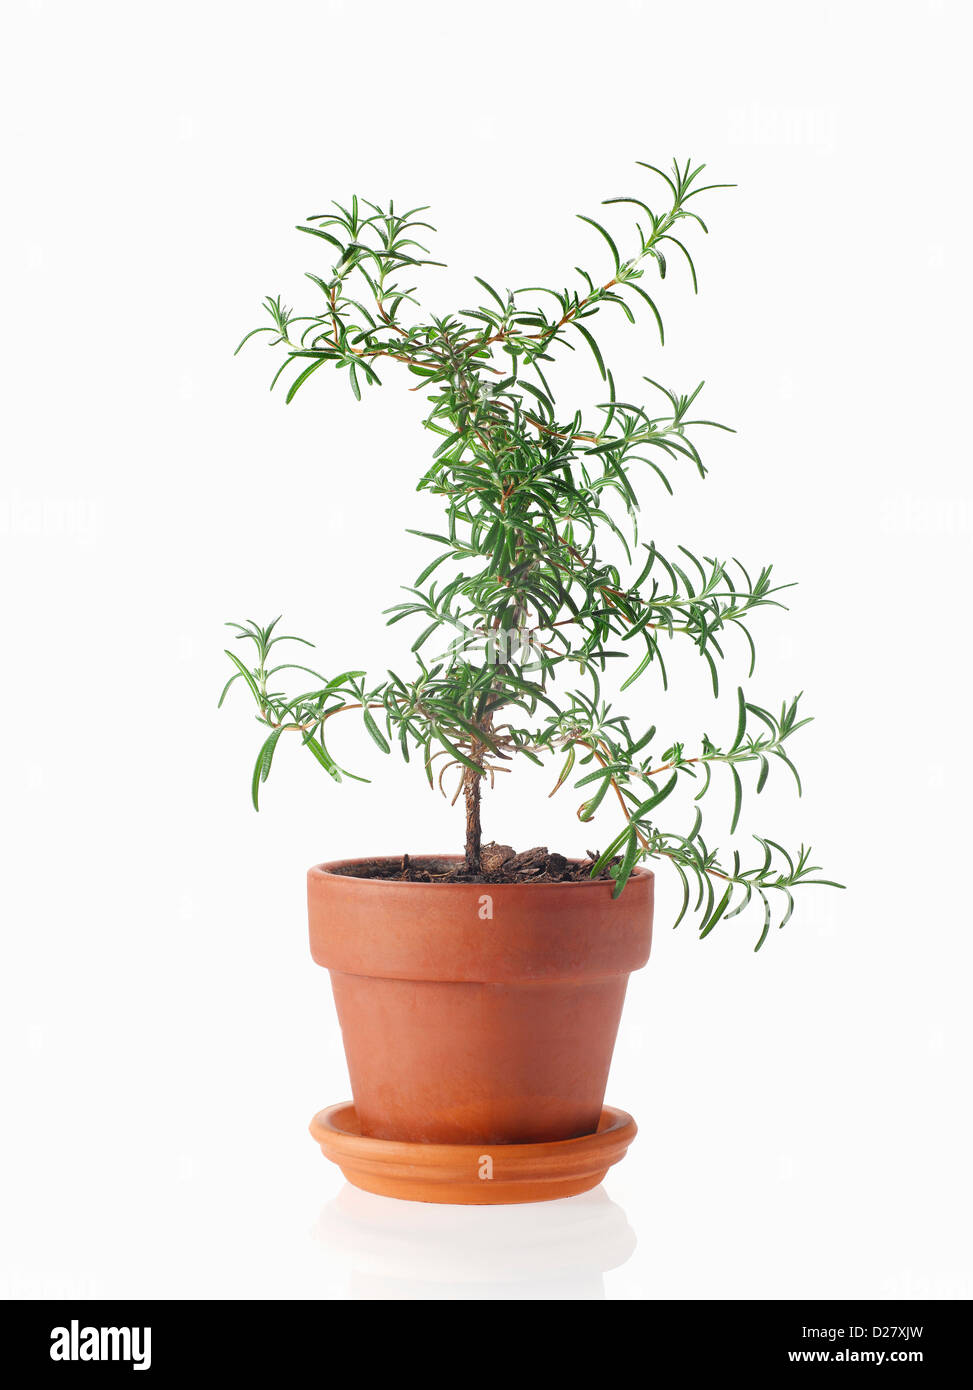 Rosemary Herb Plant in Clay Flowerpot on White Background Stock Photo